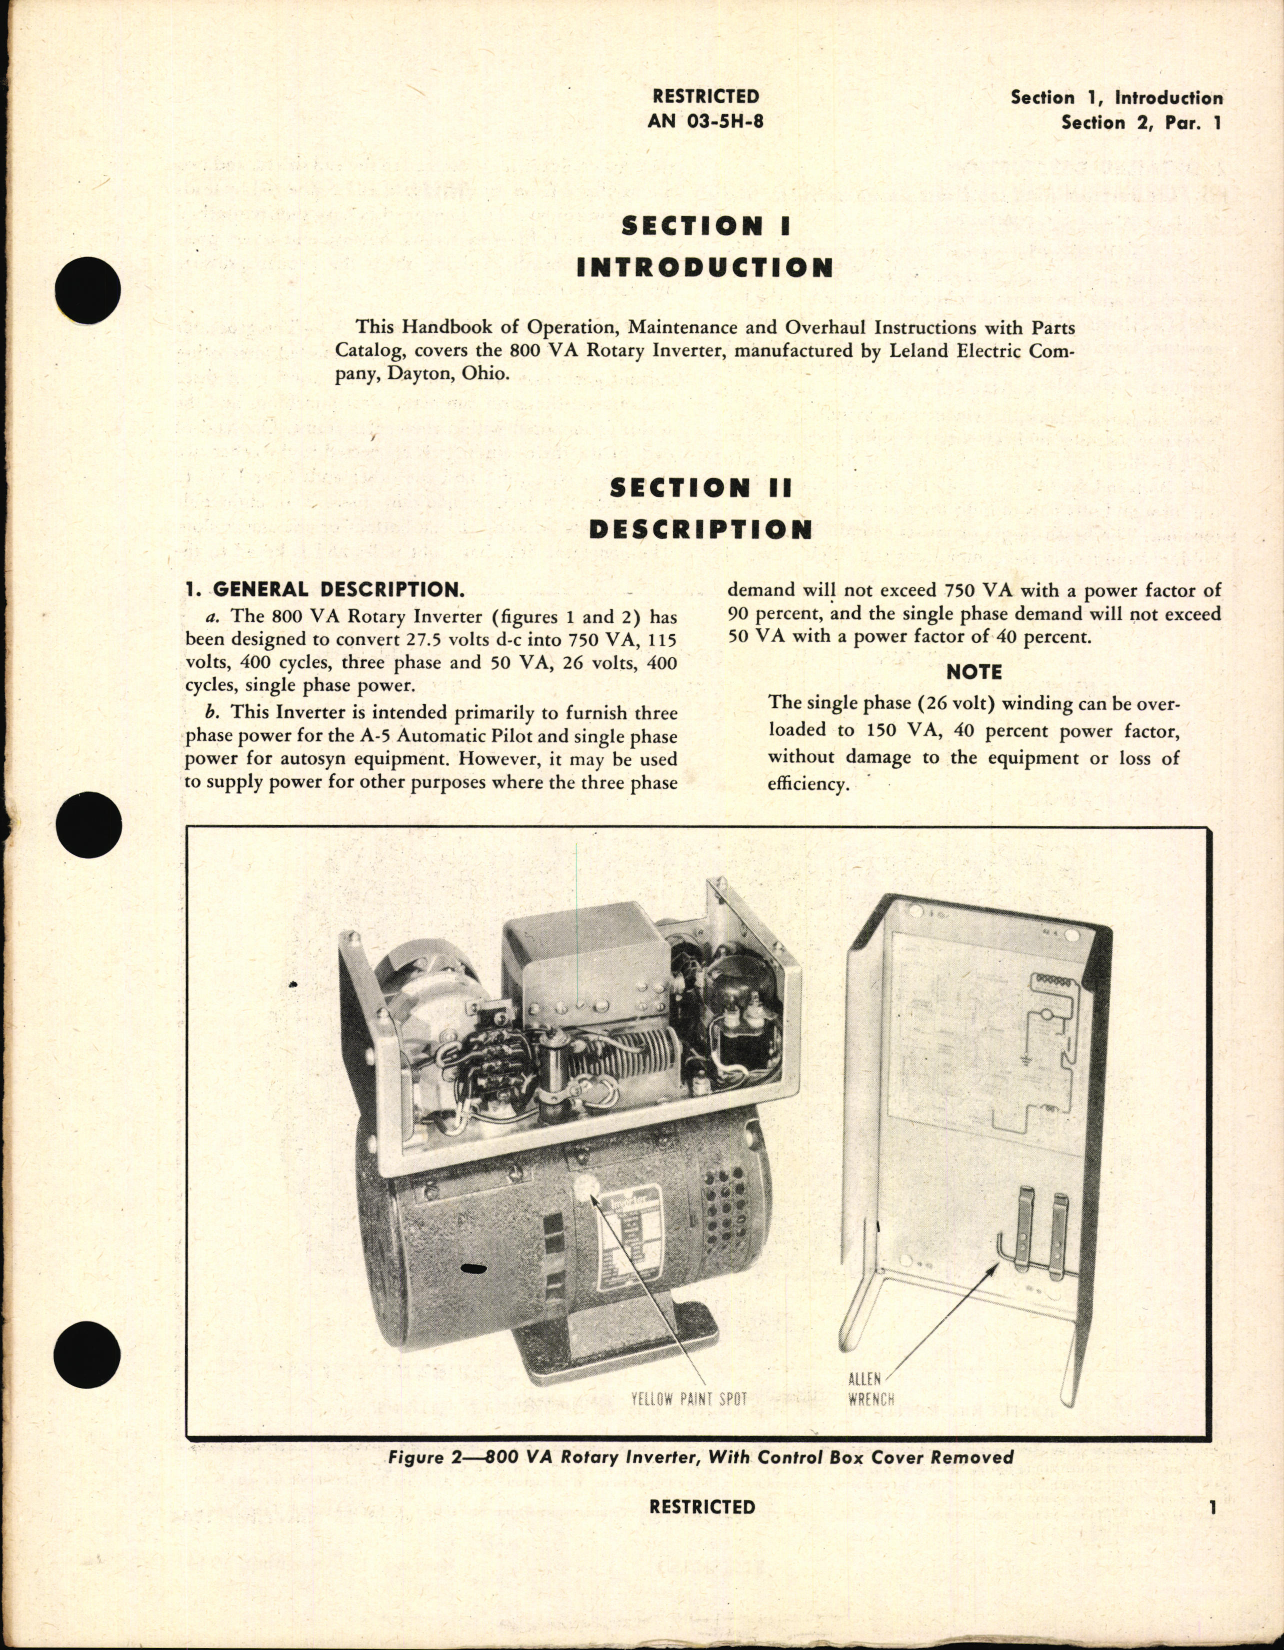 Sample page 5 from AirCorps Library document: Handbook of Instructions with Parts Catalog for 800 VA Rotary Inverter